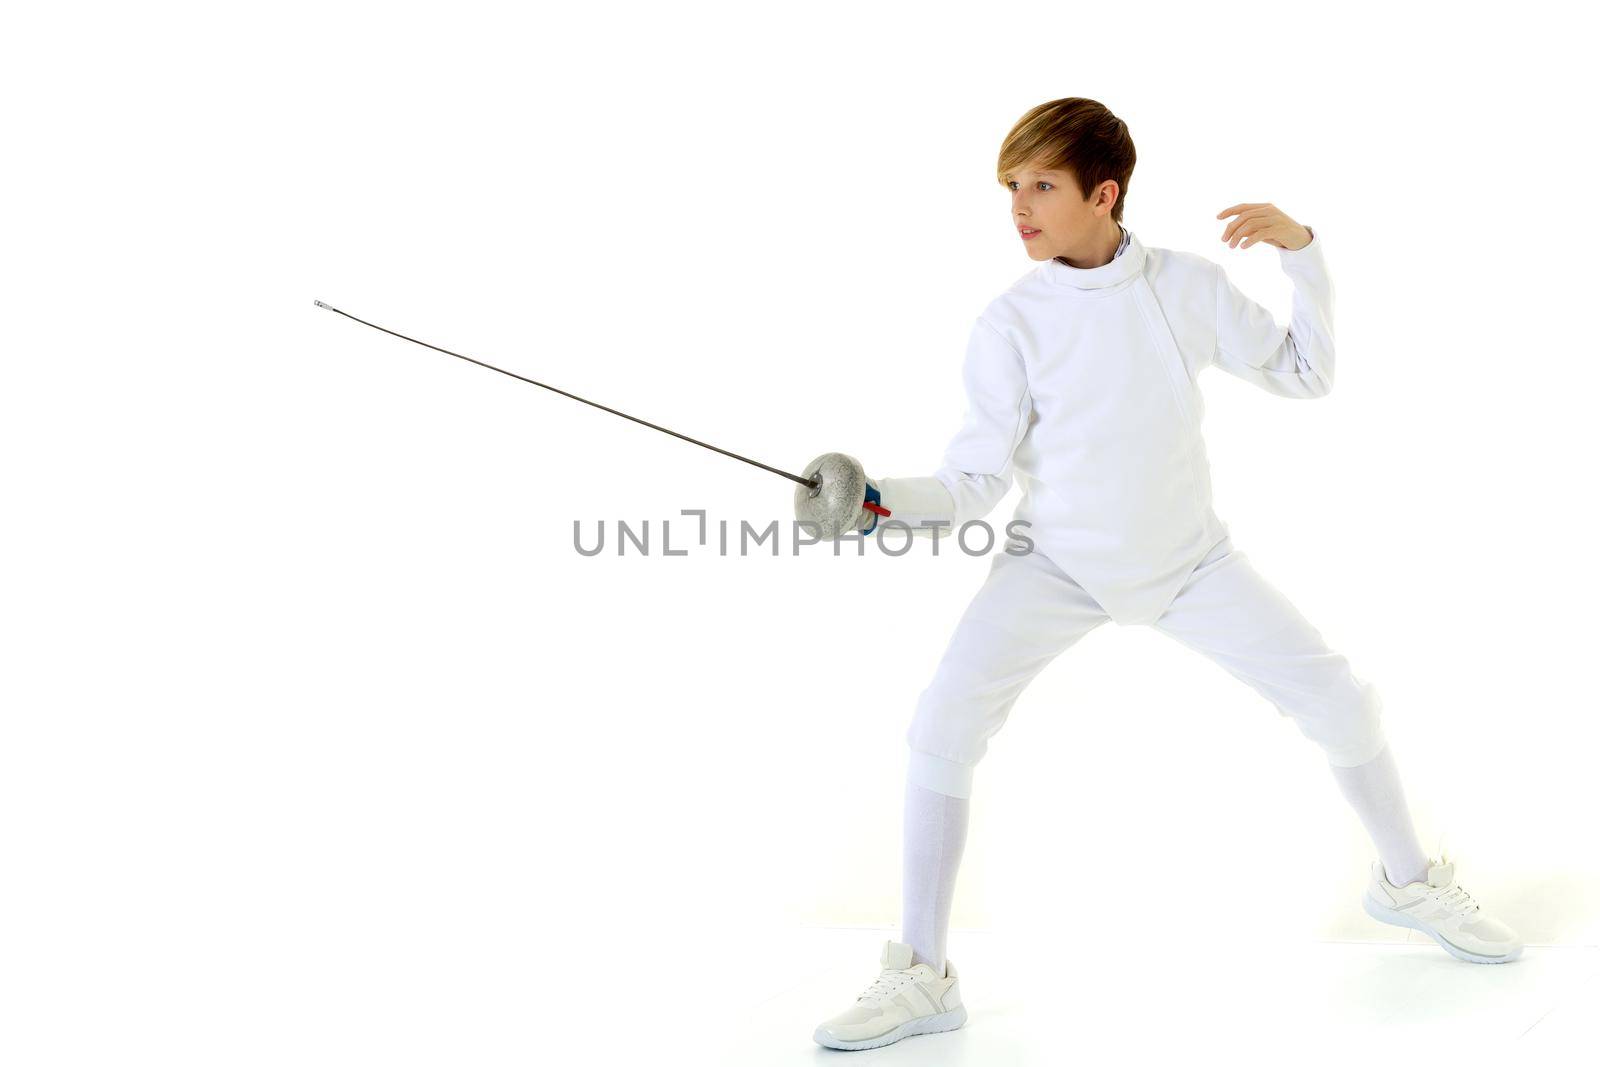 Boy fencer standing in attacking pose. Junior boy wearing white fencing suit posing with rapier against white background. Teenager practicing in fencing or taking part at tournament